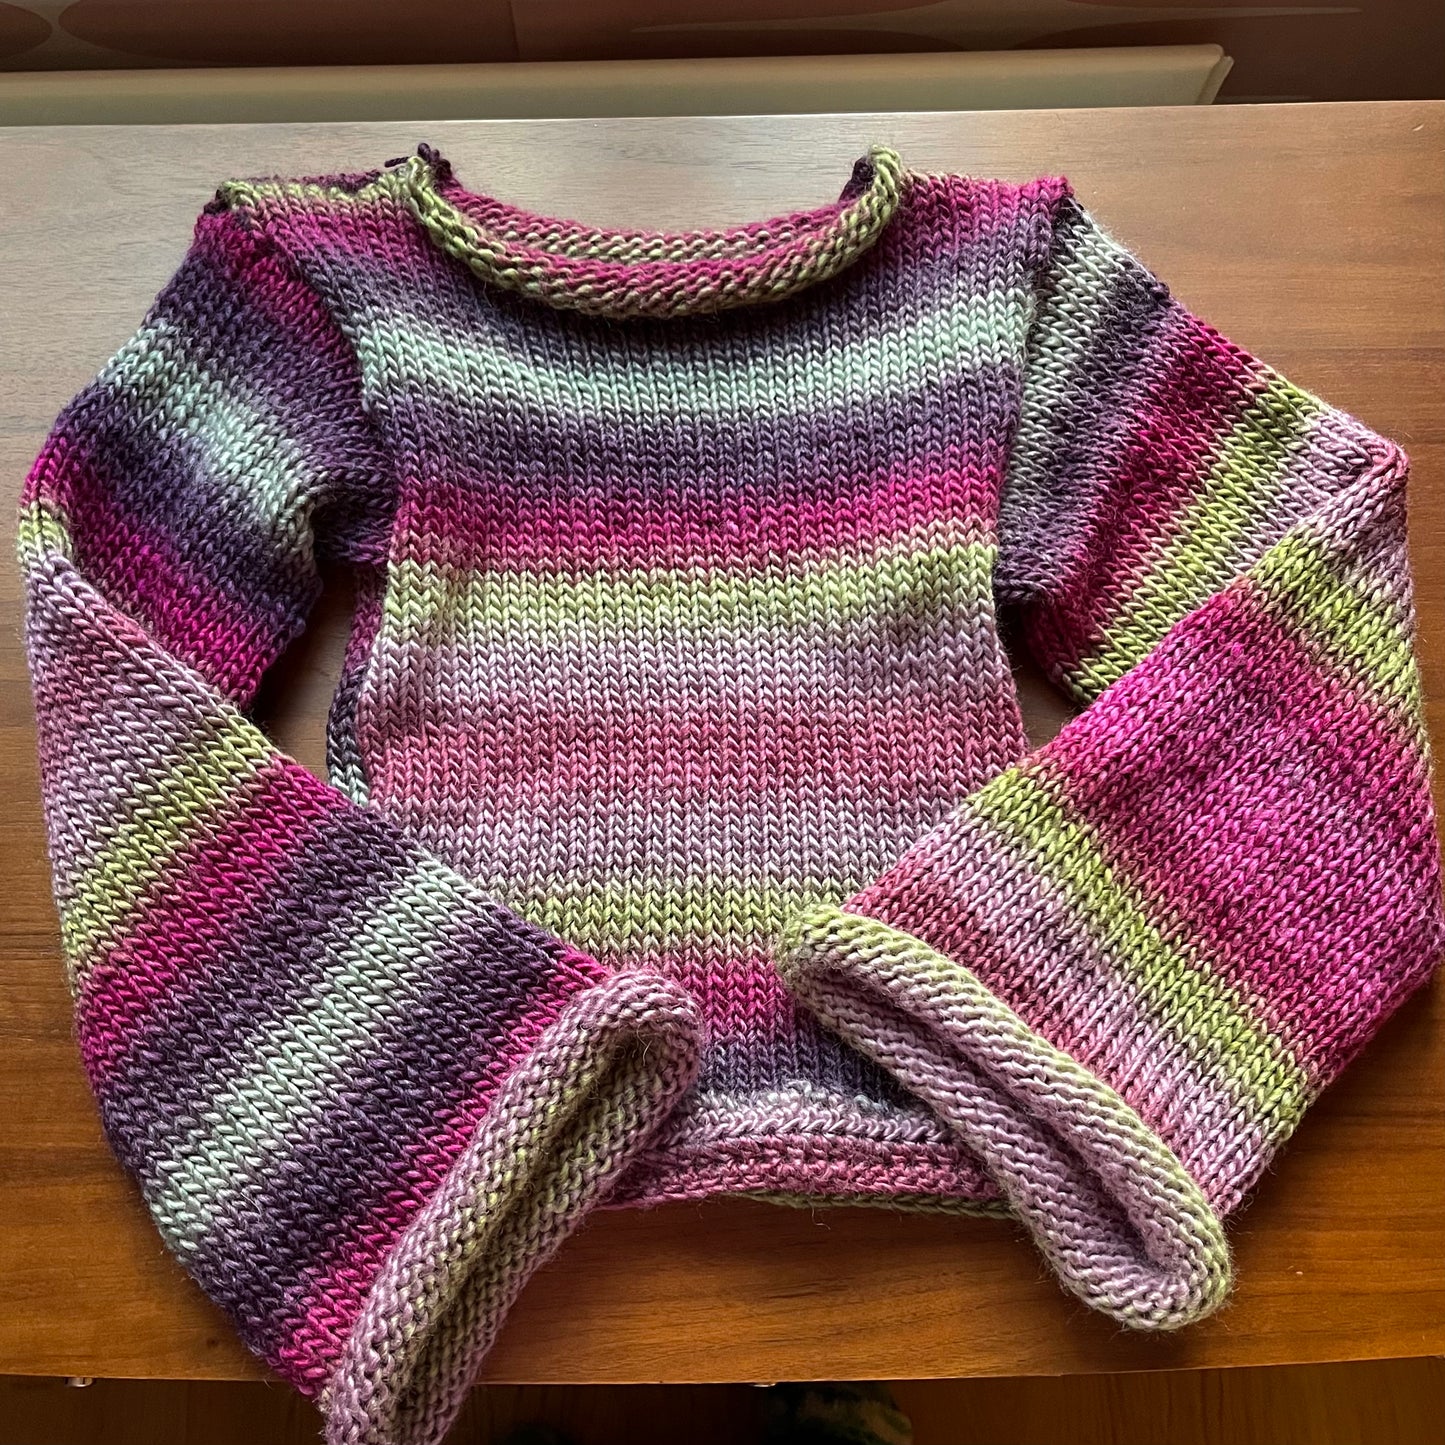 Handmade ombré knitted flared sleeve jumper in green and purple shades